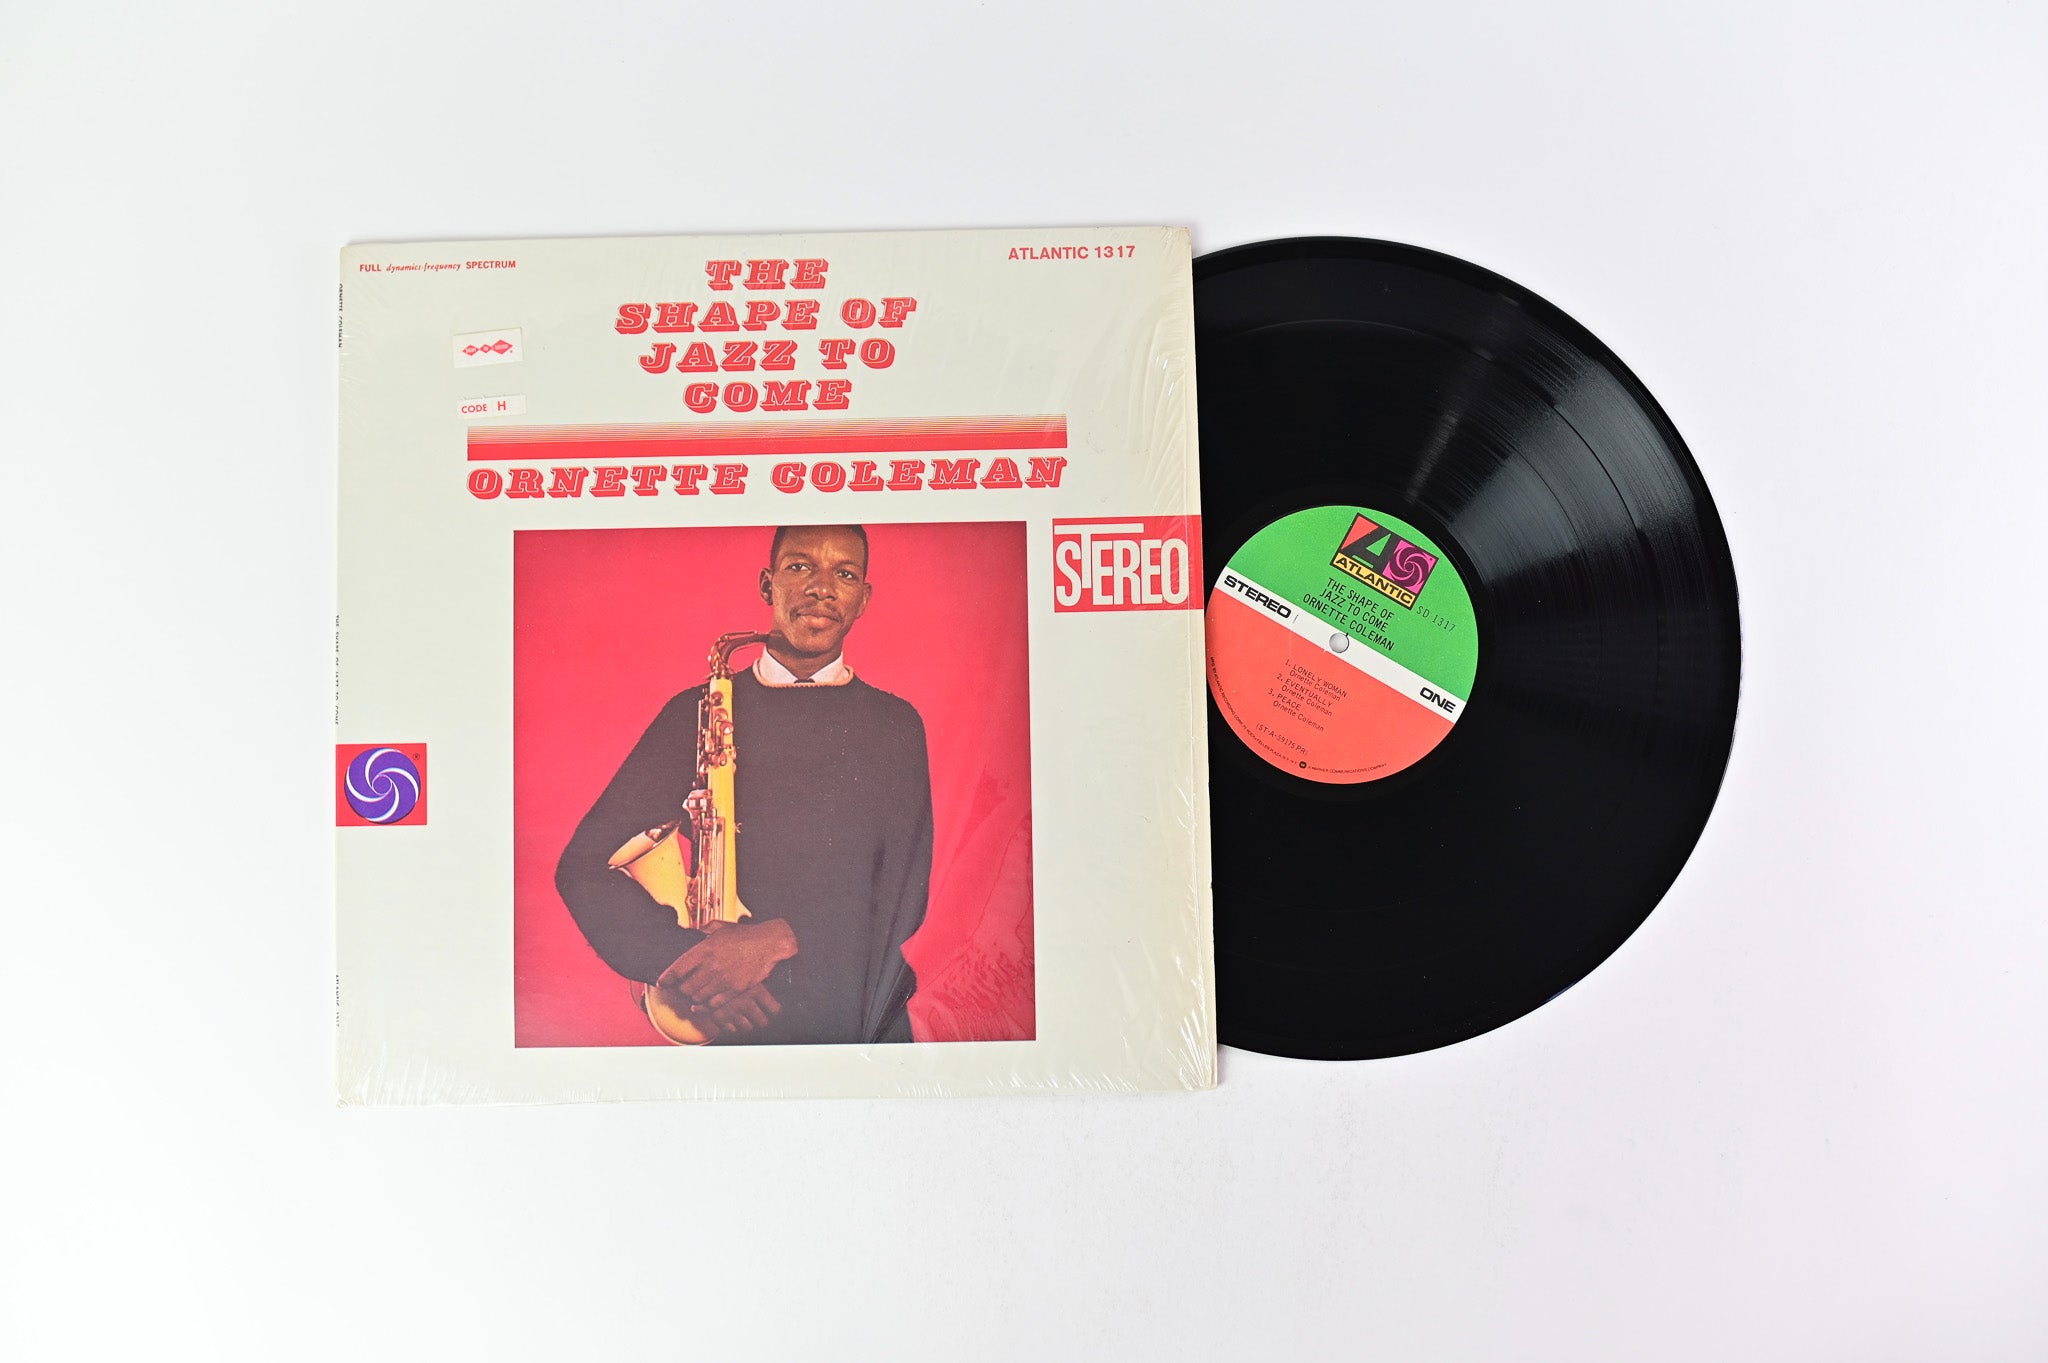 Ornette Coleman - The Shape Of Jazz To Come on Atlantic Reissue